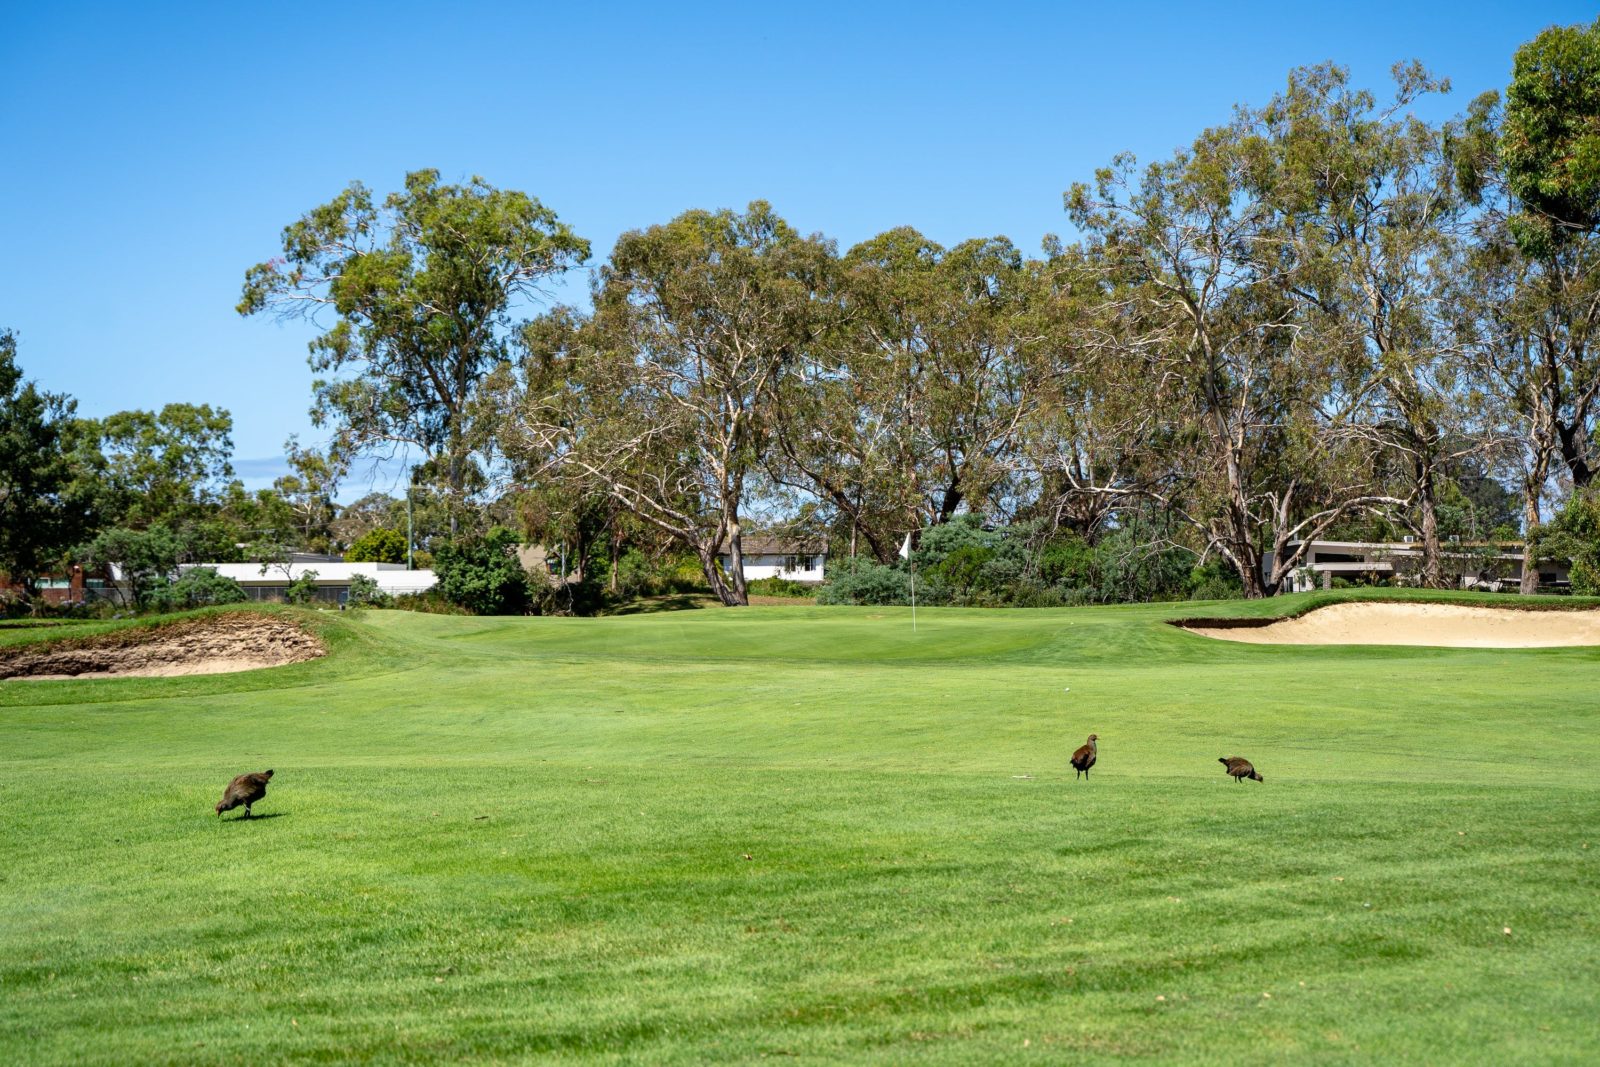 Golf green, with a bunker either side, native hens in foreground